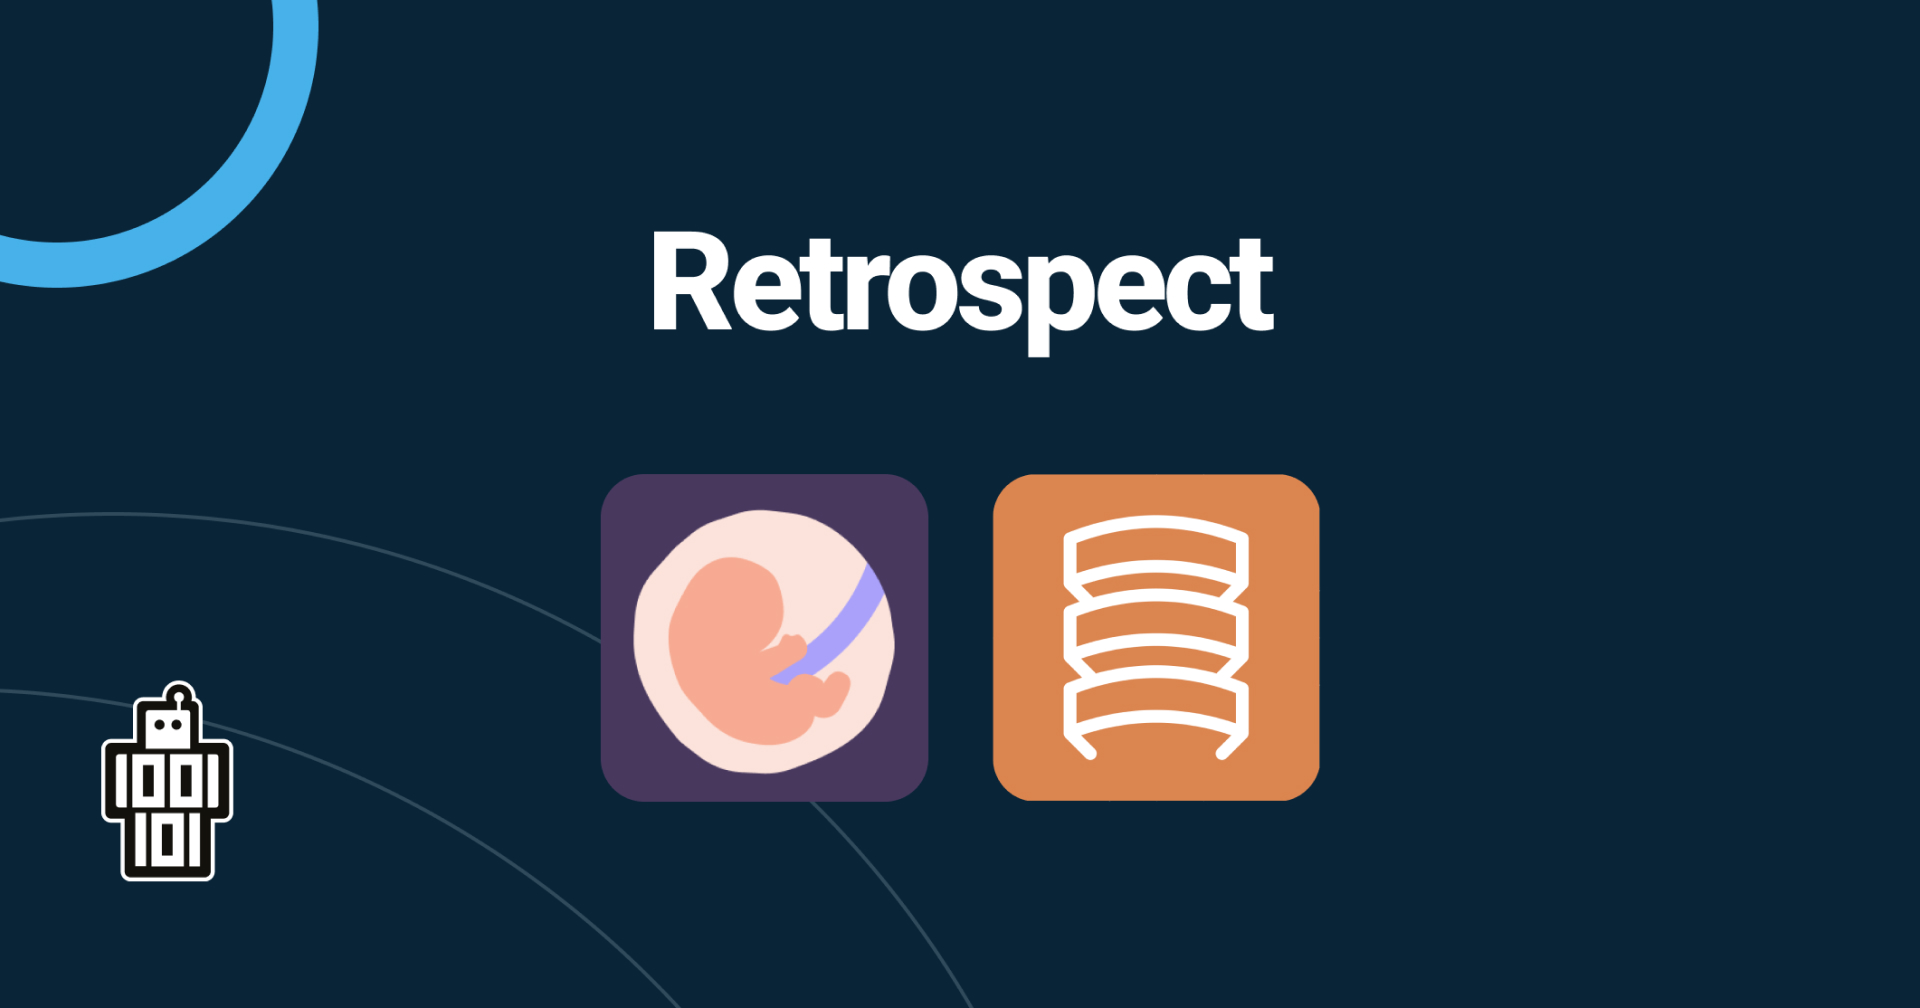 Retrospect Q4 - Our update about the latest developments of 9to5